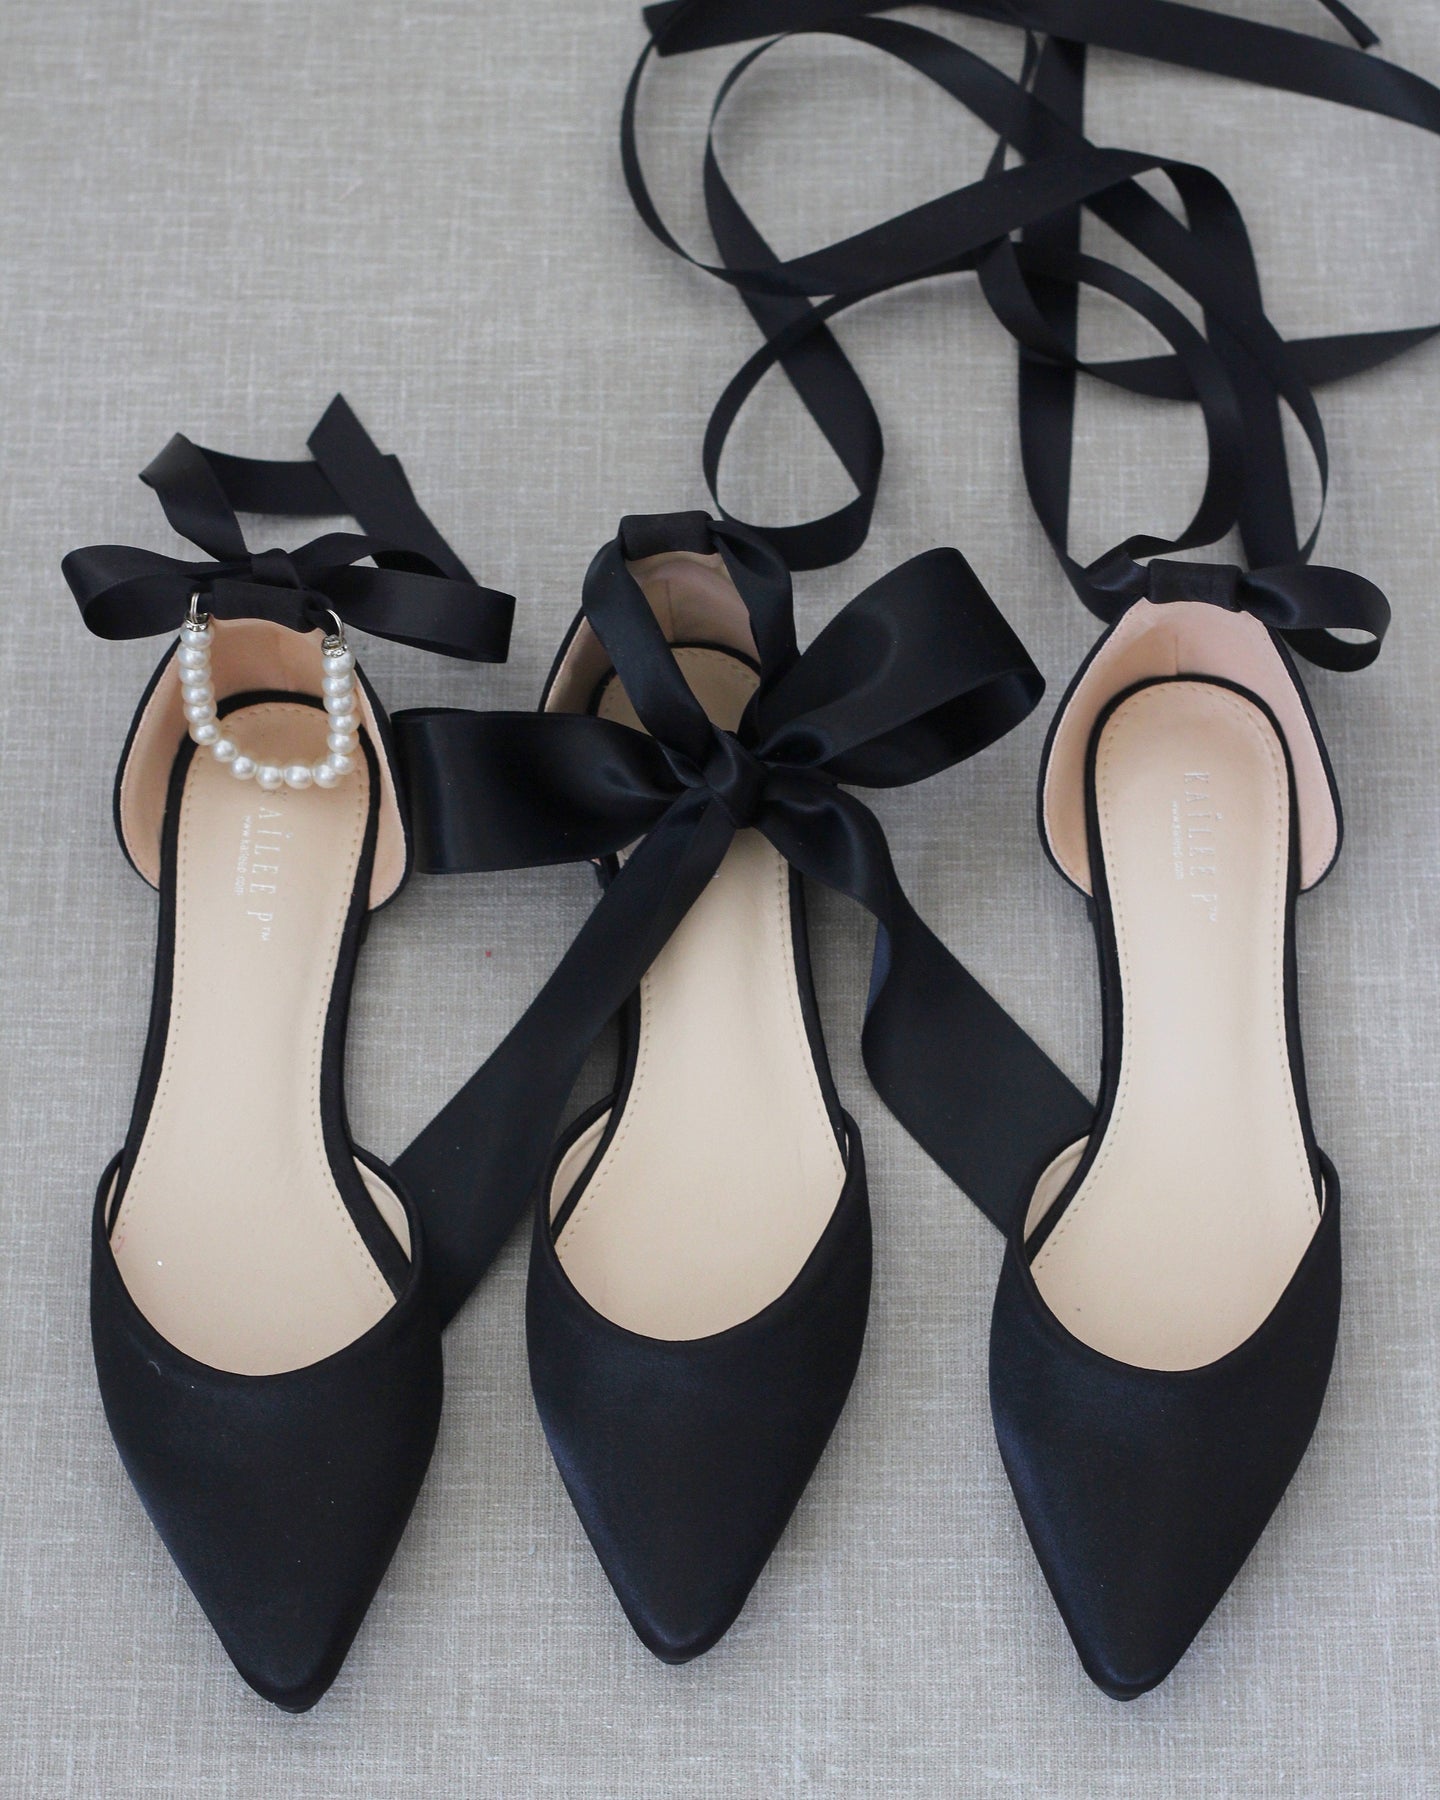 Black Satin Pointy Toe Flats with Satin Ankle Tie or Ballerina Lace Up - Wedding Shoes, Bridesmaids Shoes, Evening Shoes US 7 / UK 5 / EU 37 / Pearl 